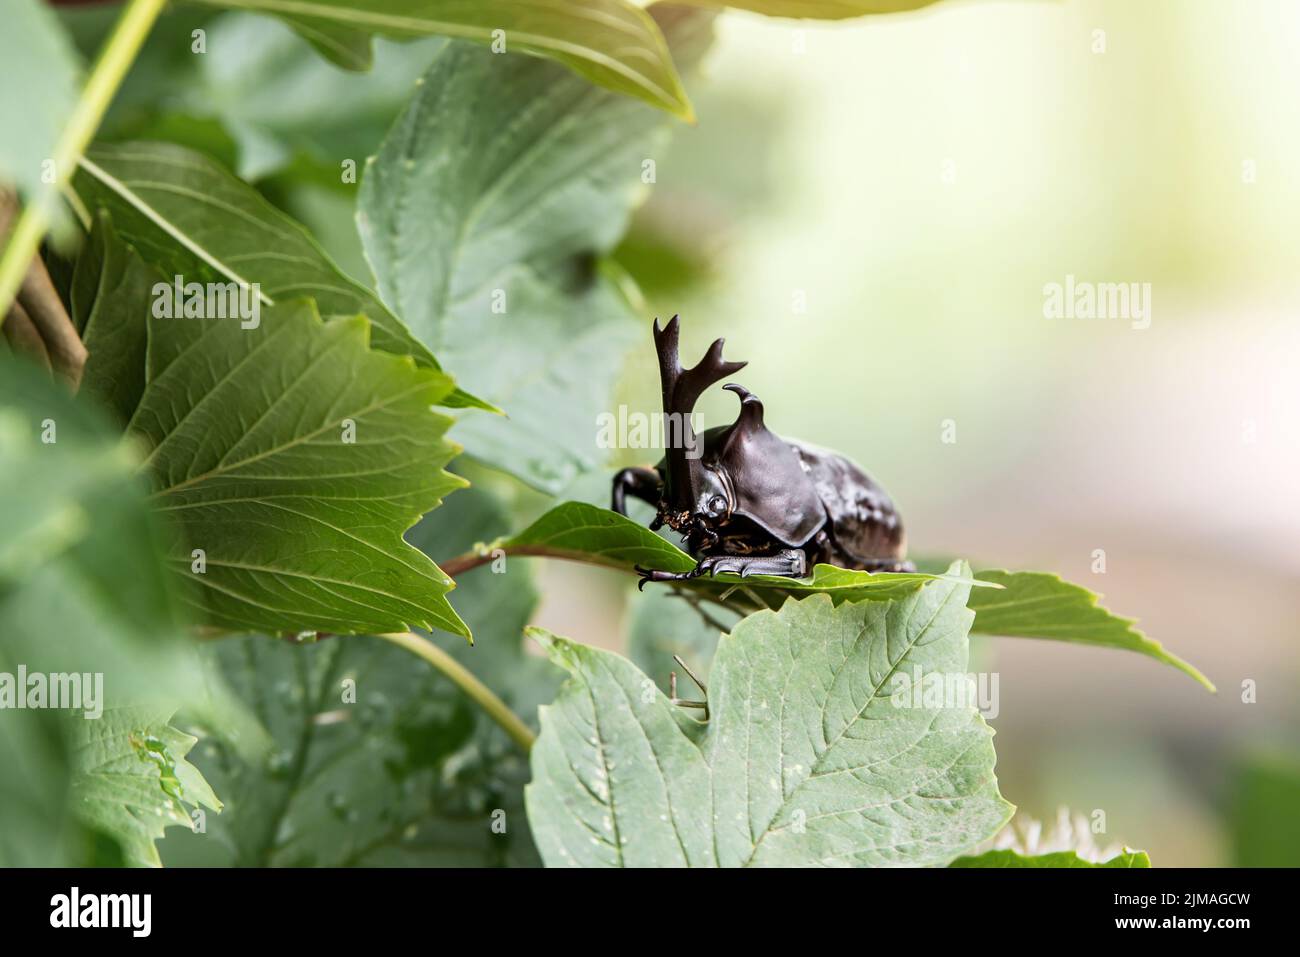 The beautiful dynastic beetle , male , perched on leaf. Selective focus. Leaves background Stock Photo